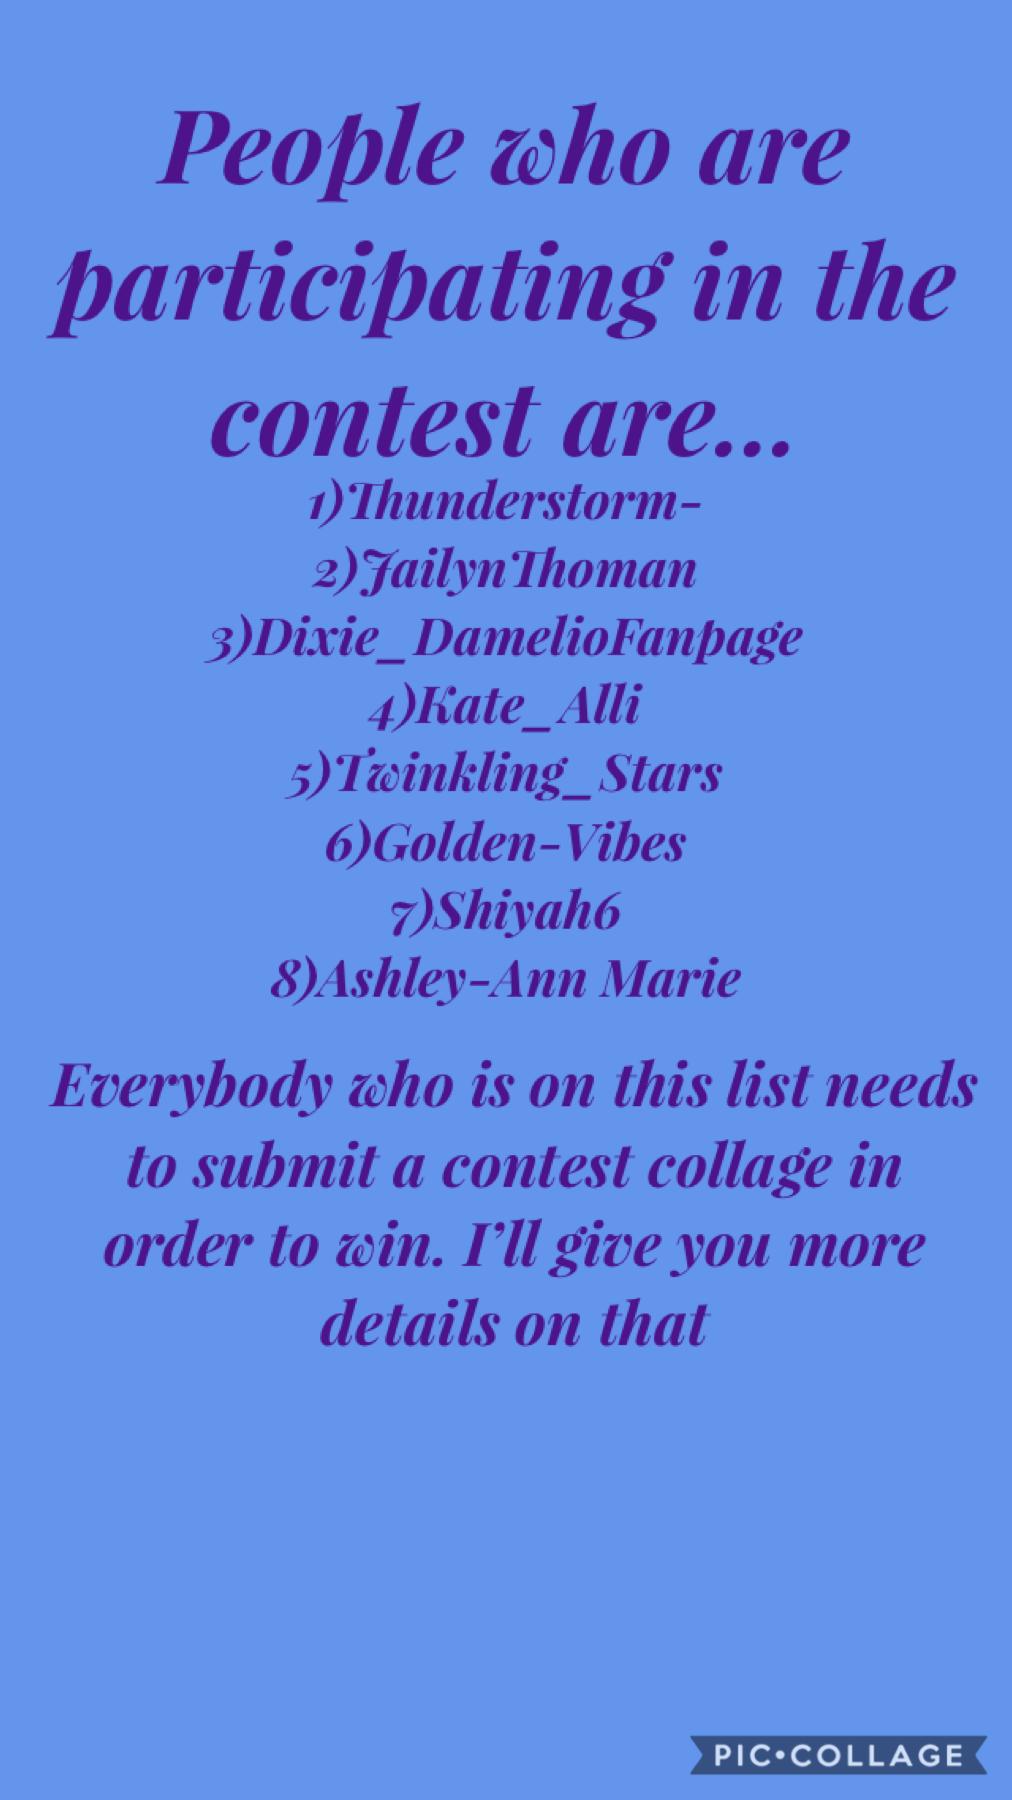 Contest collage will be posted soon